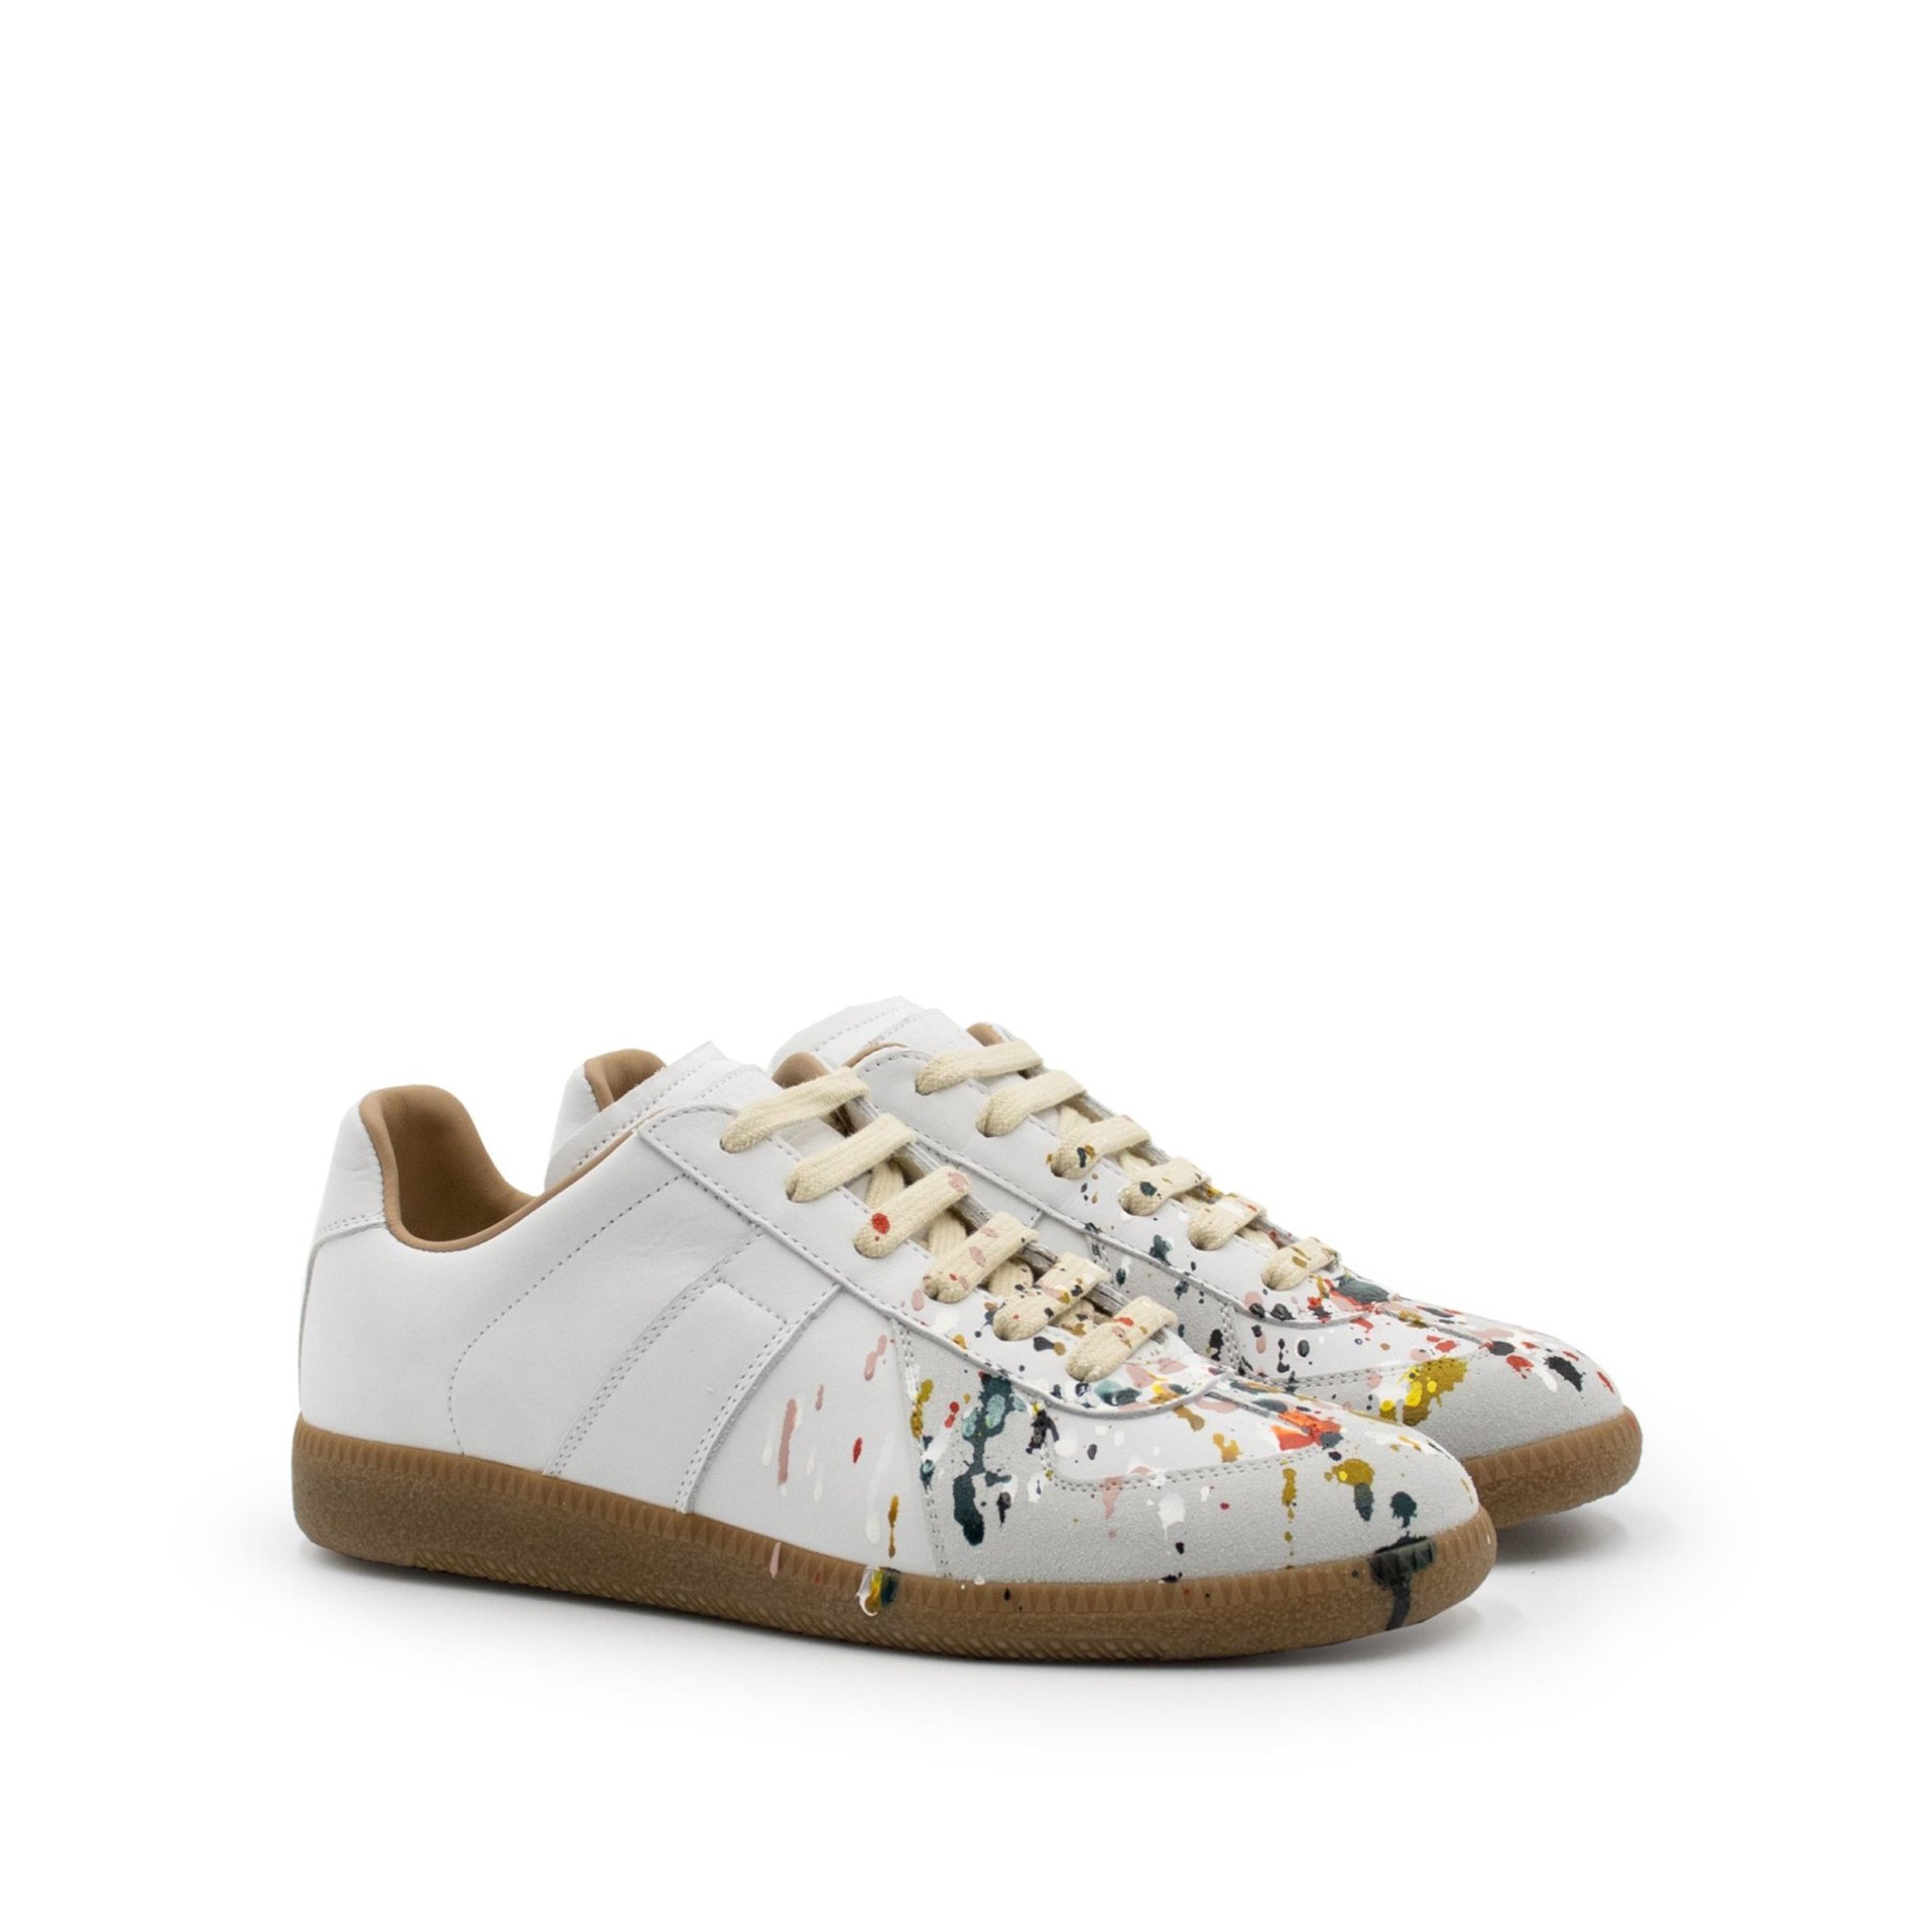 maison margiela replica paint drop sneakers in white sold out sold out ...